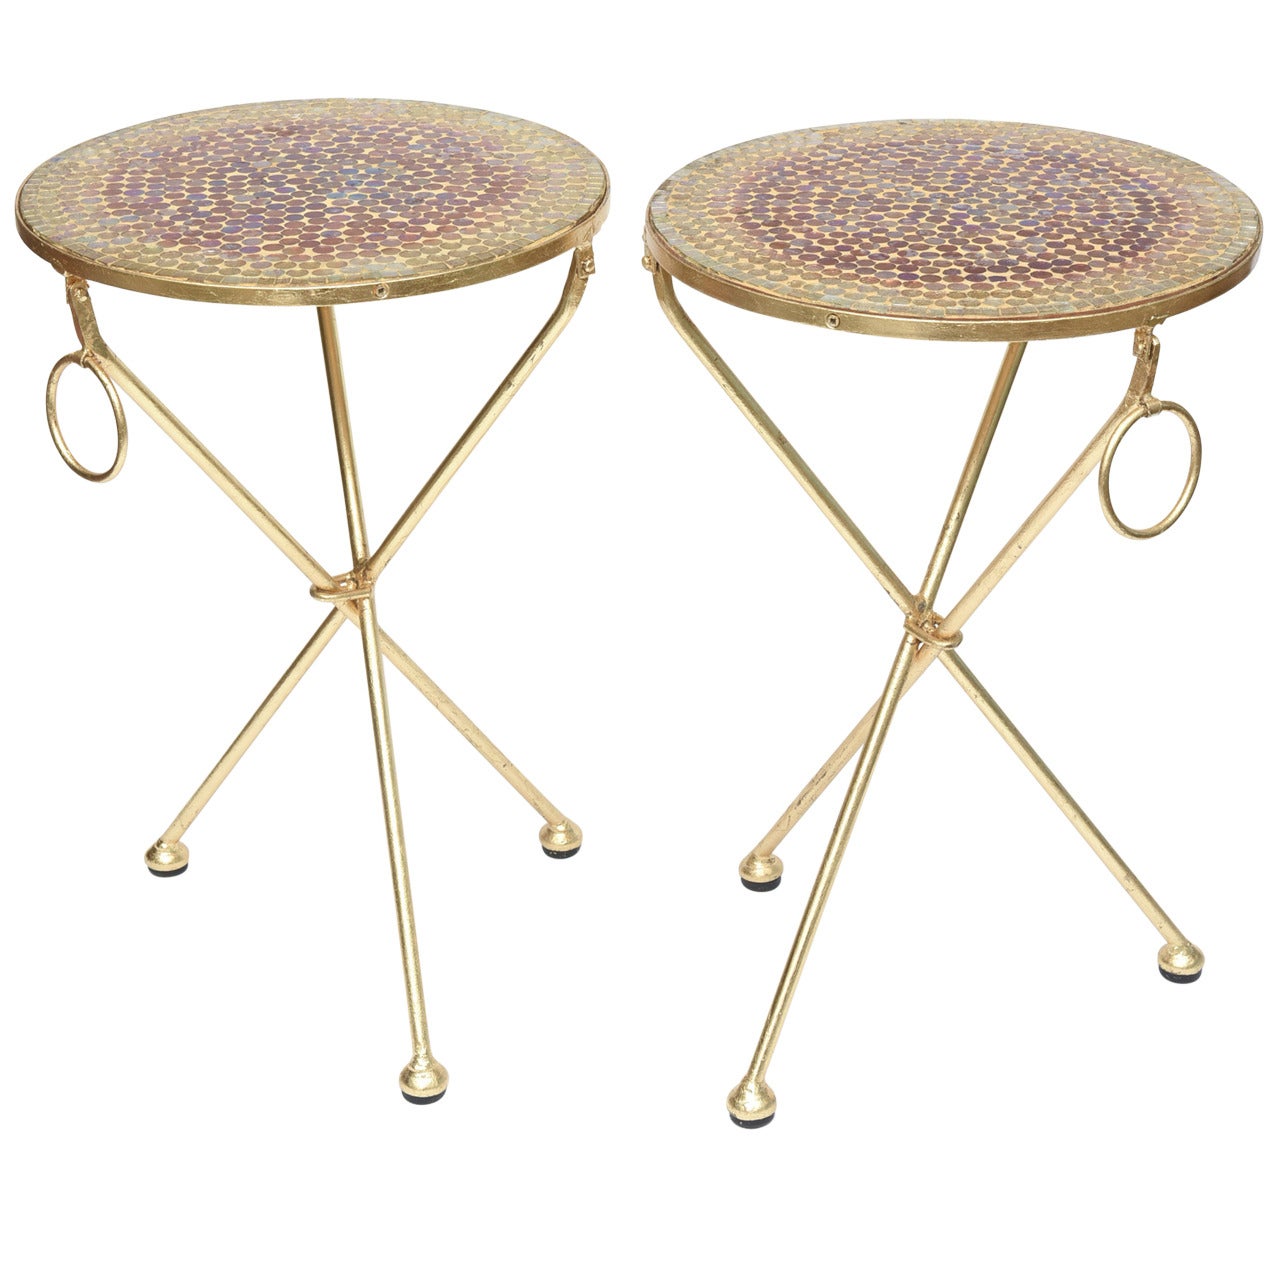 Pair of Italian Vintage Gold Leaf and Mosaic Glass Tripod Side Tables